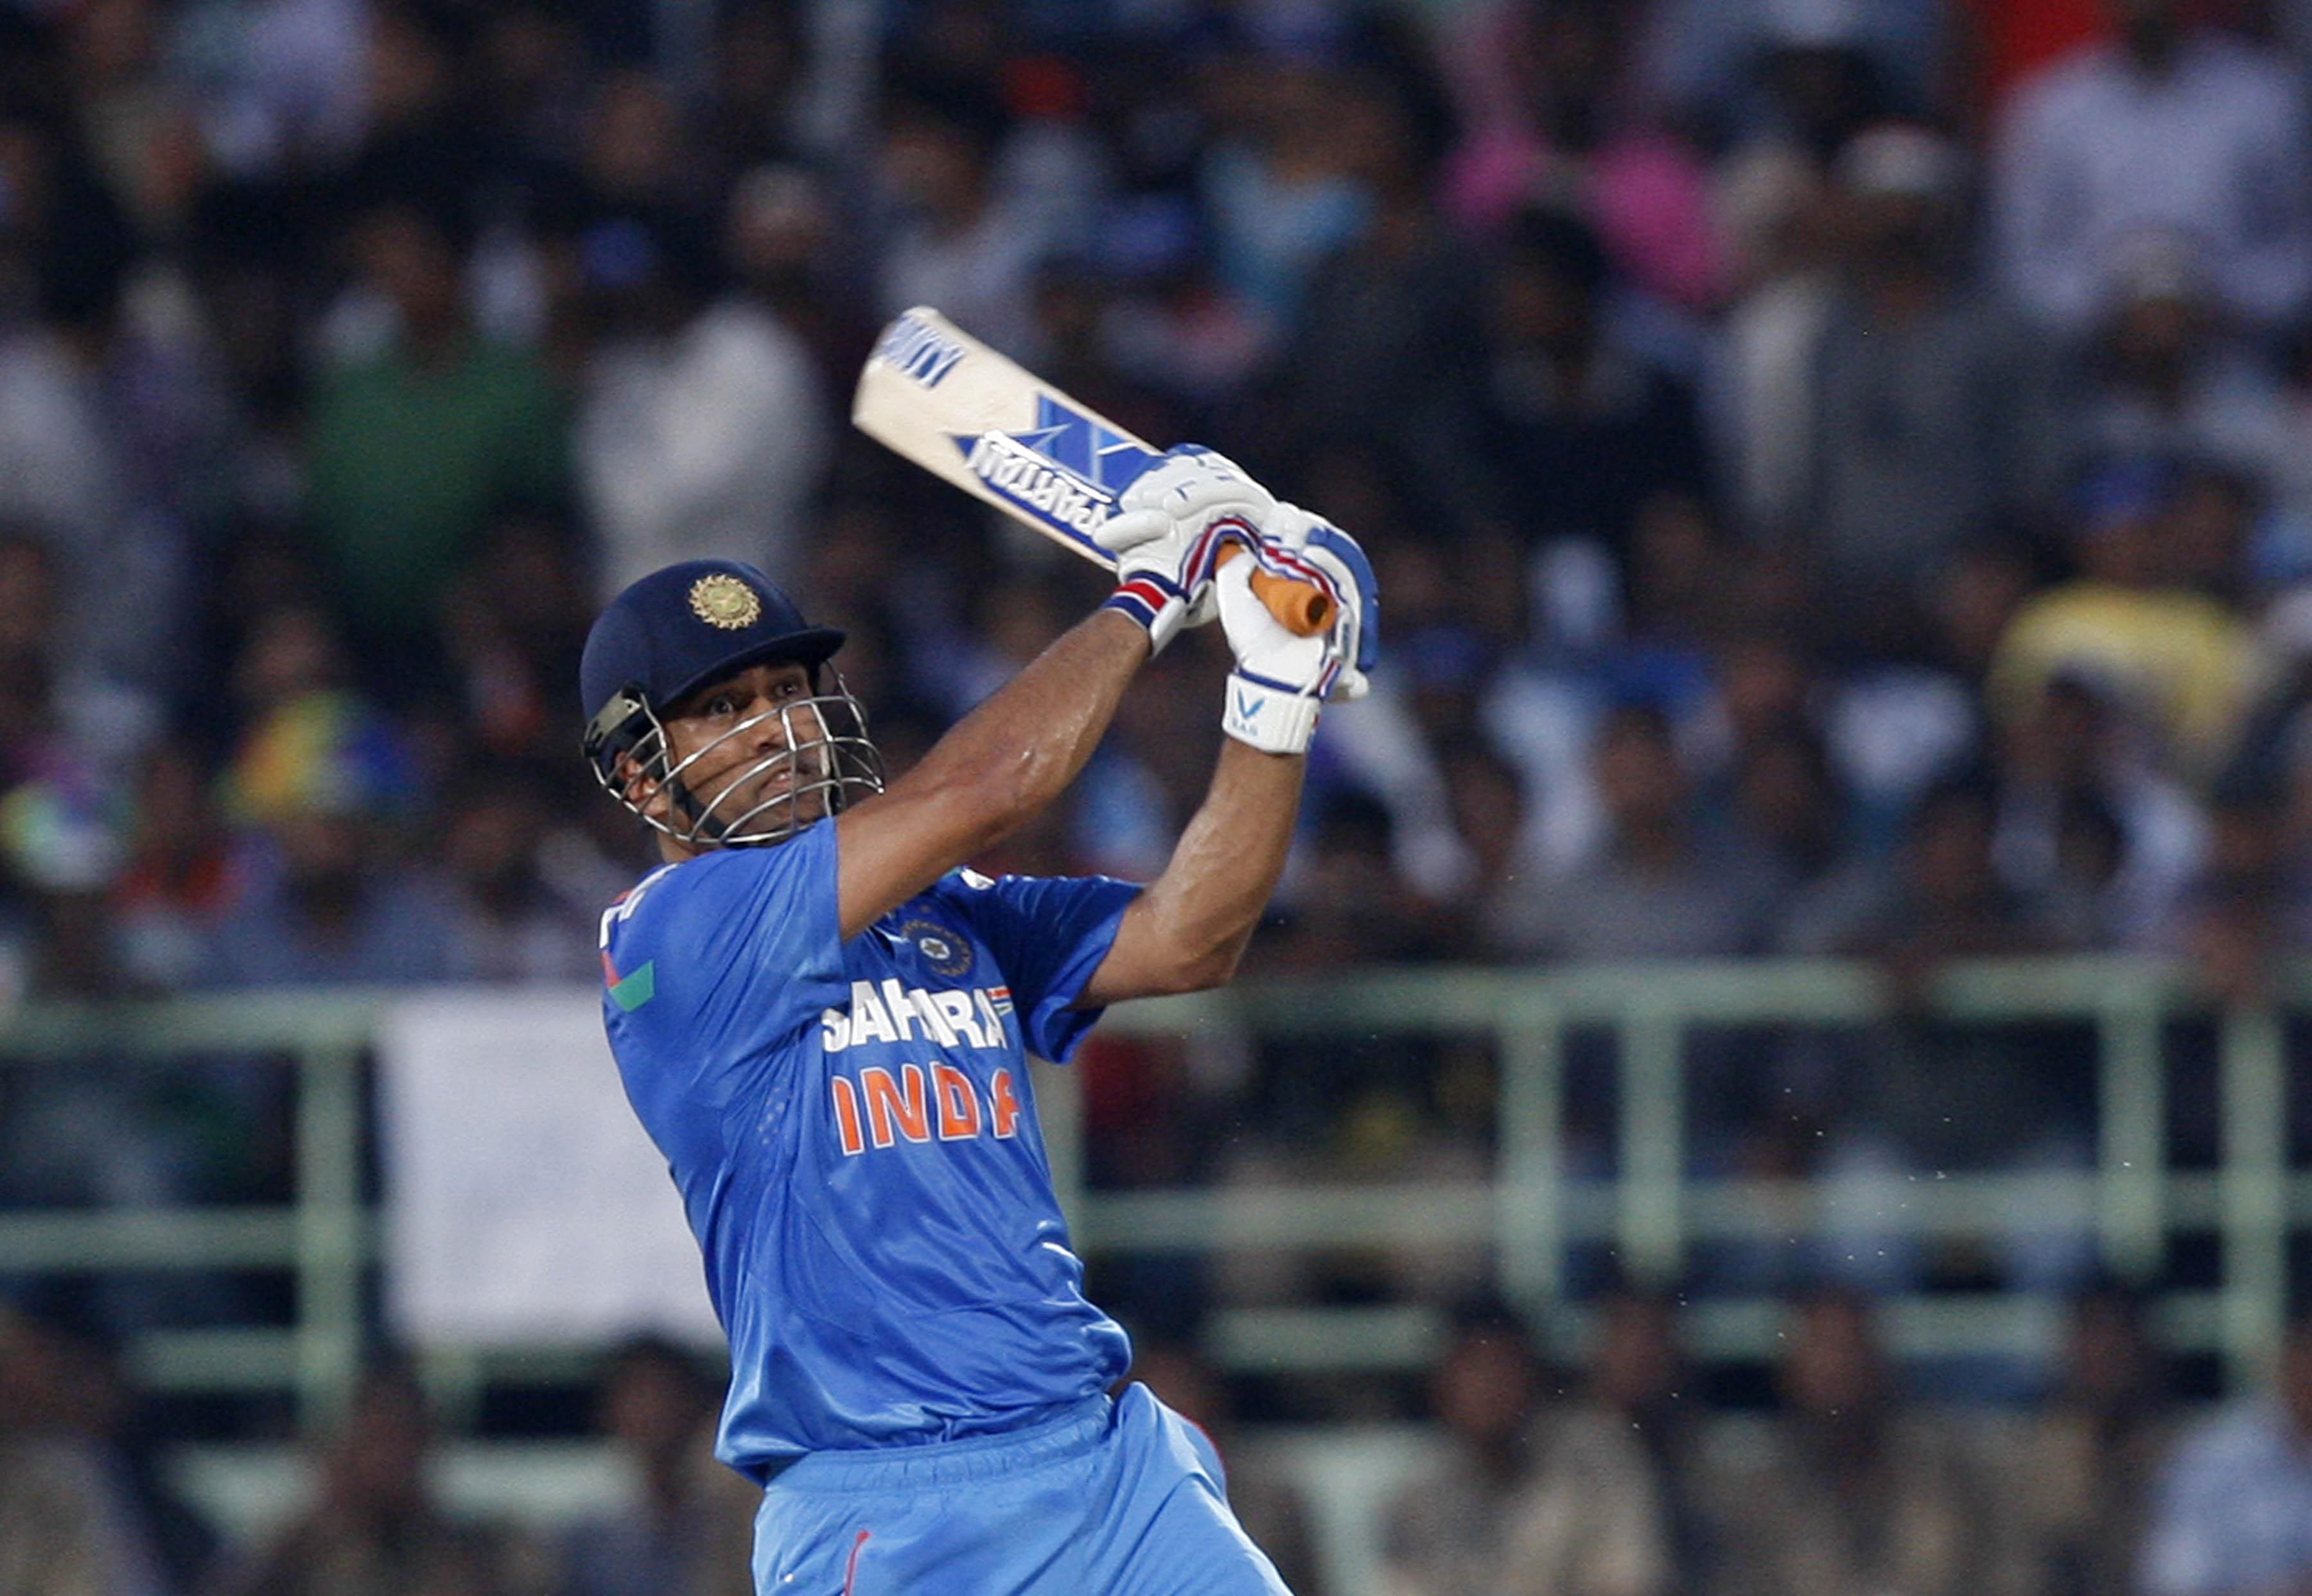 MS Dhoni strikes bat deal worth 25 crores - Cricket Country3600 x 2485